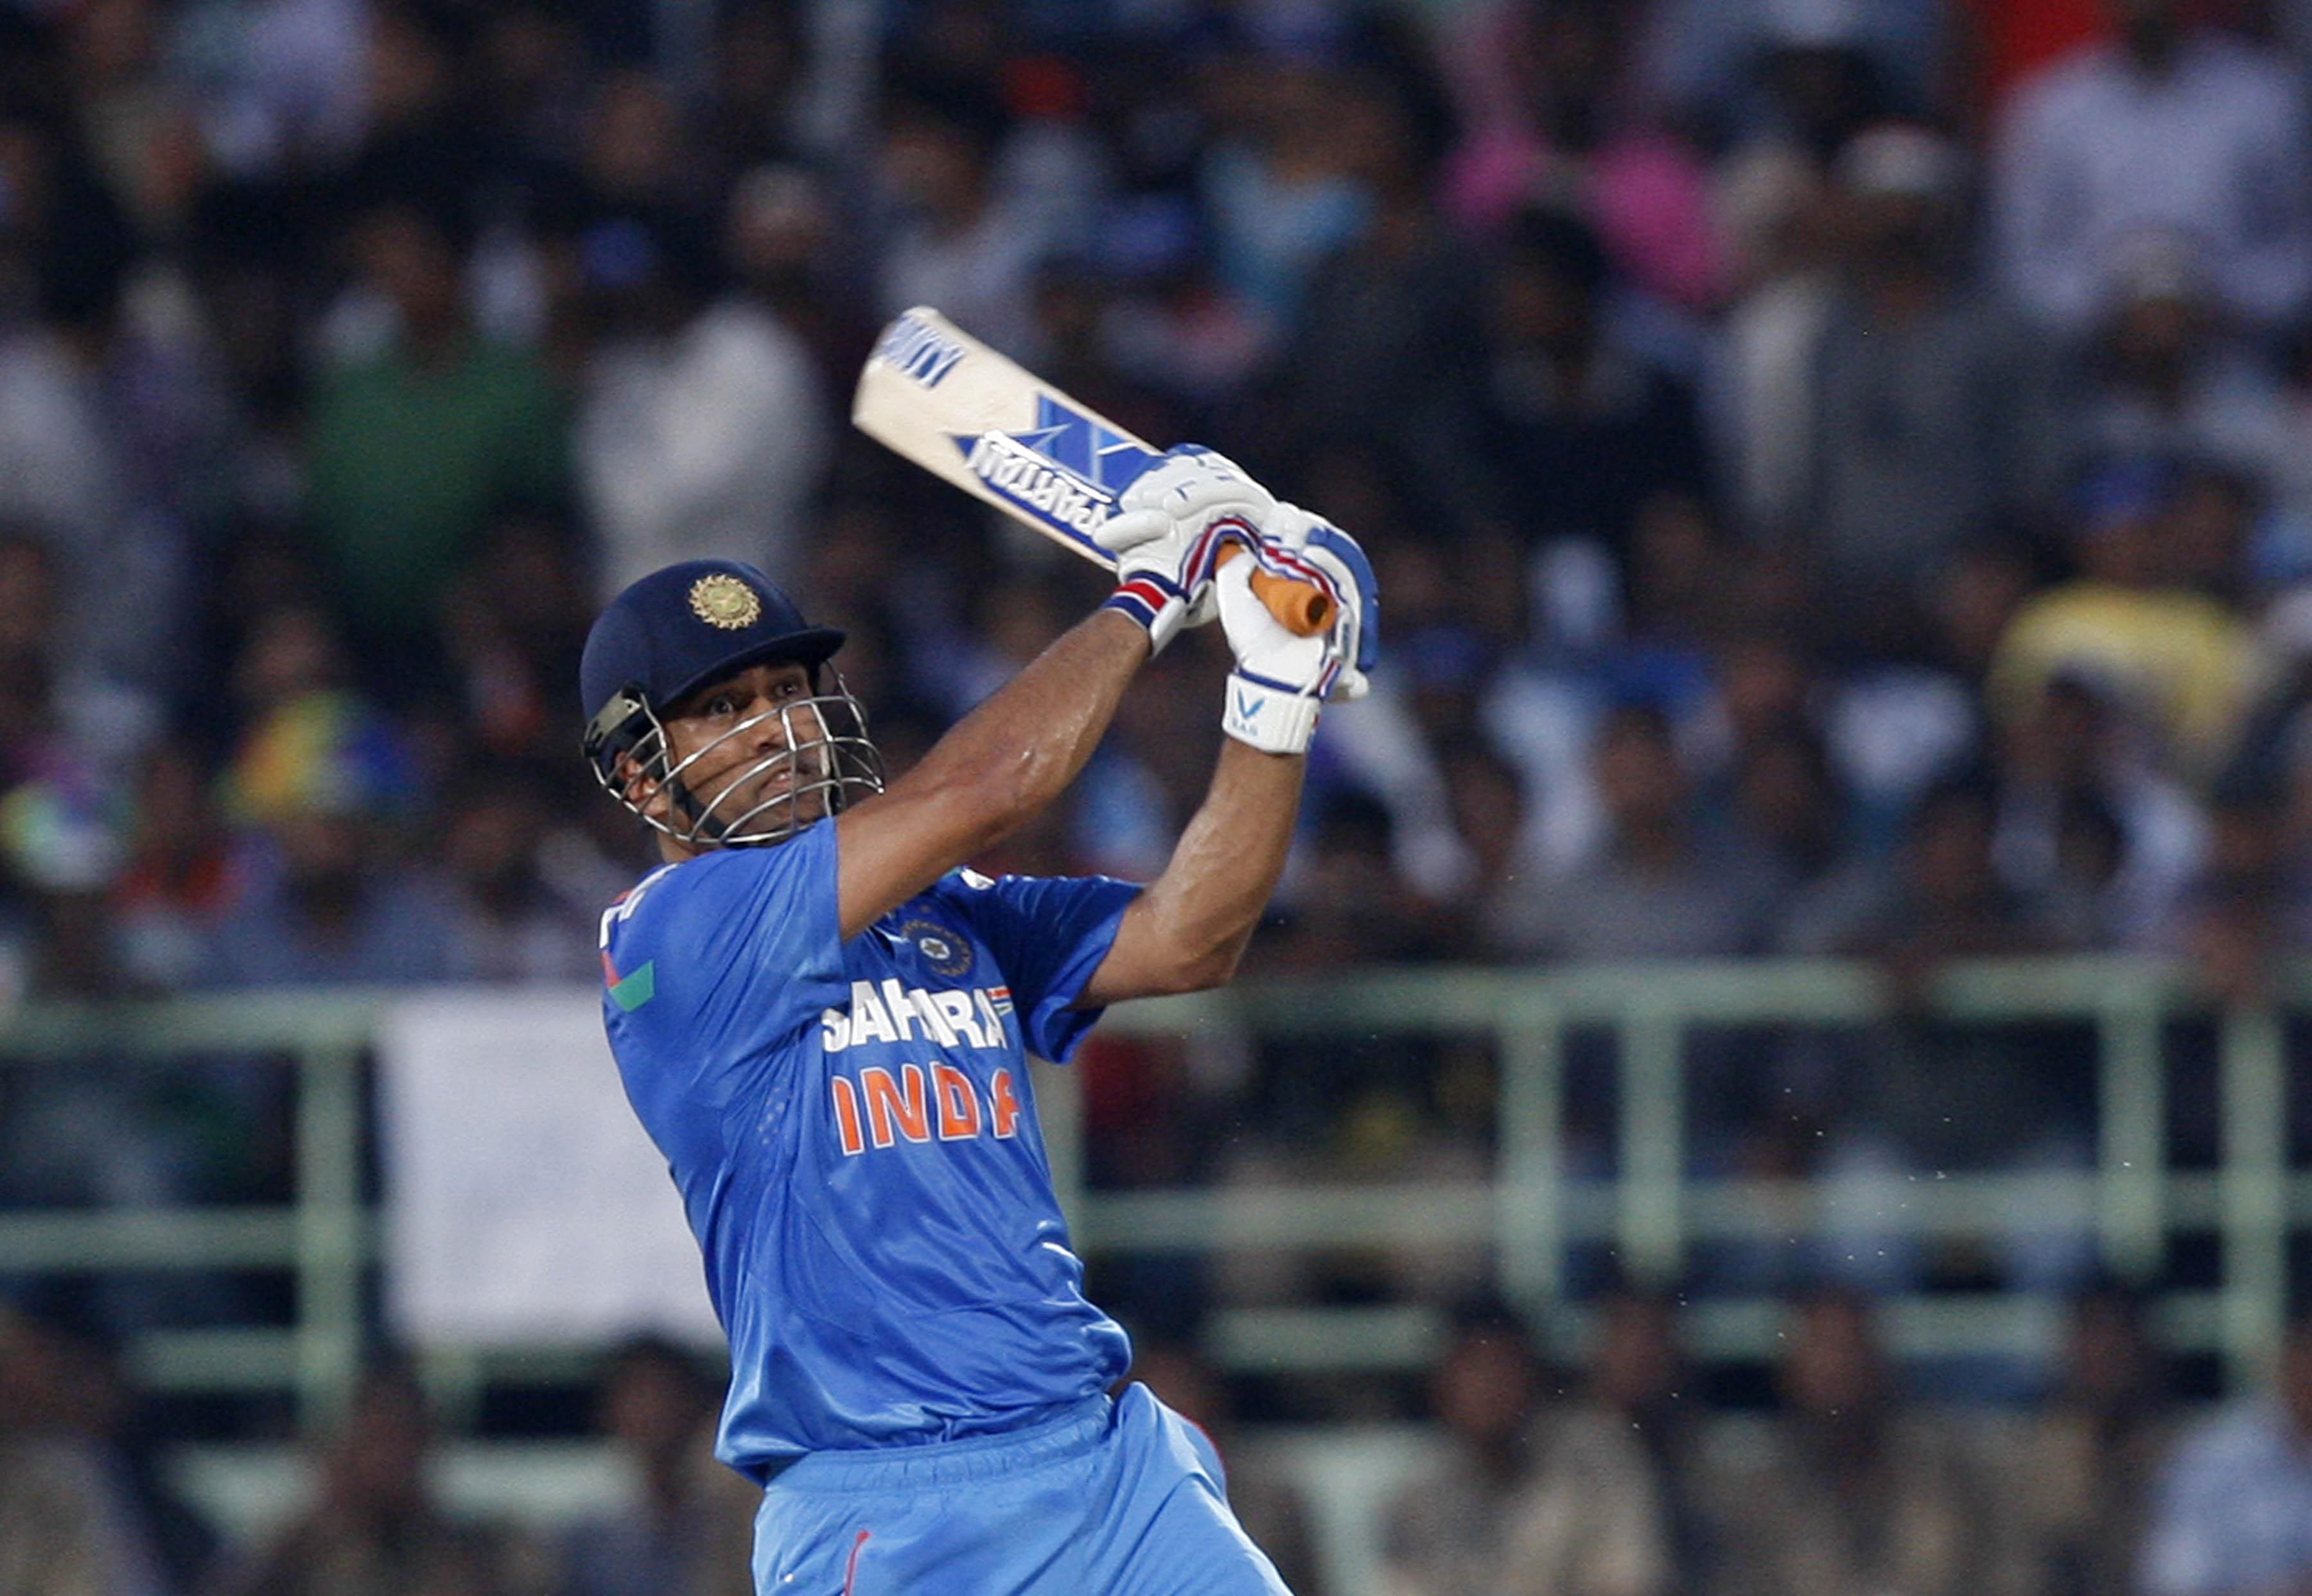 MS Dhoni strikes bat deal worth 25 crores - Cricket Country3600 x 2485